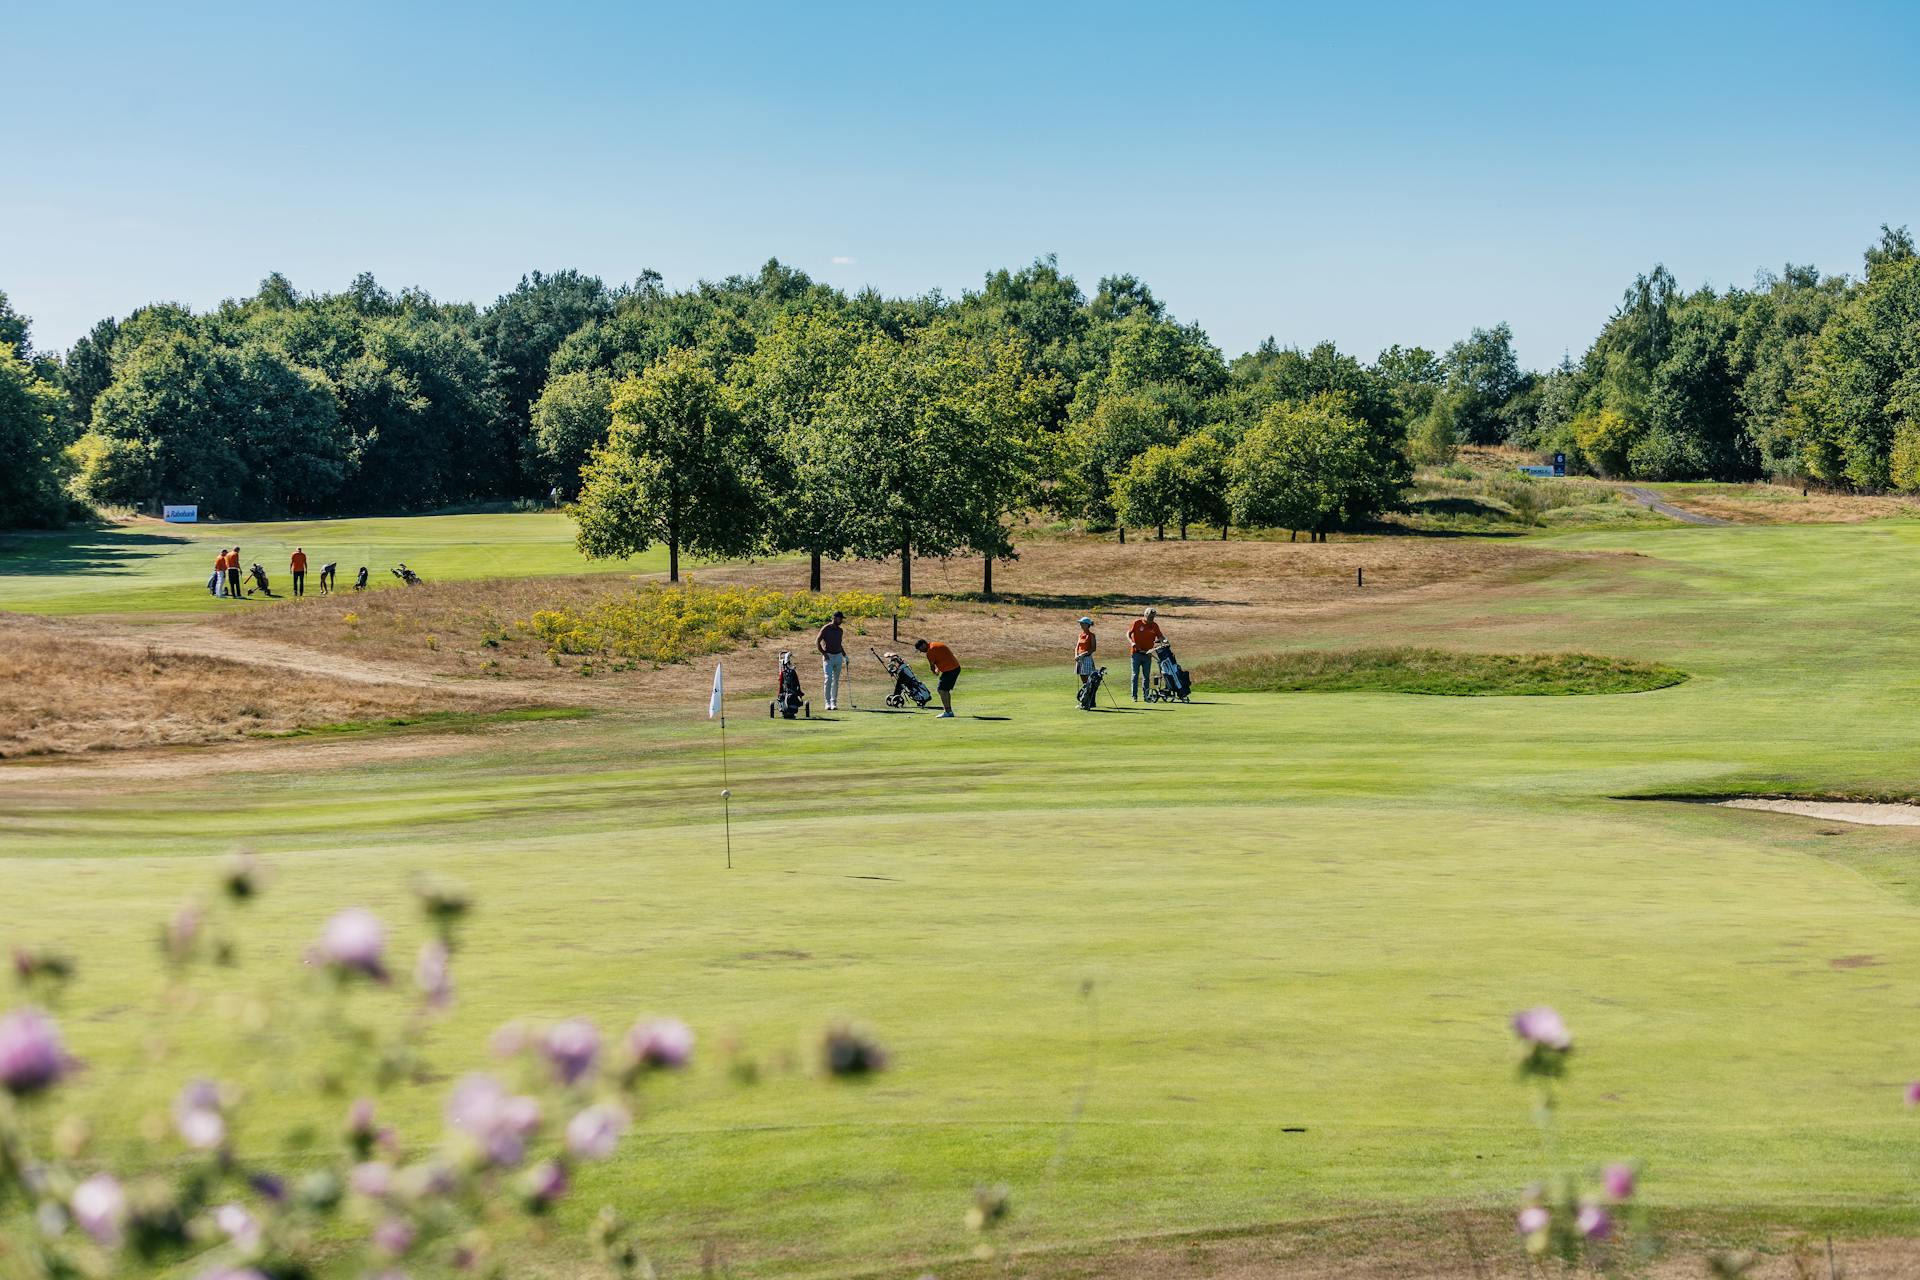 The Dutch course is currently scoring an average of 8.4 on Leadingcourses.com, the largest golf course review site of Europe. Source: Drentse Golf Club De Gelpenberg